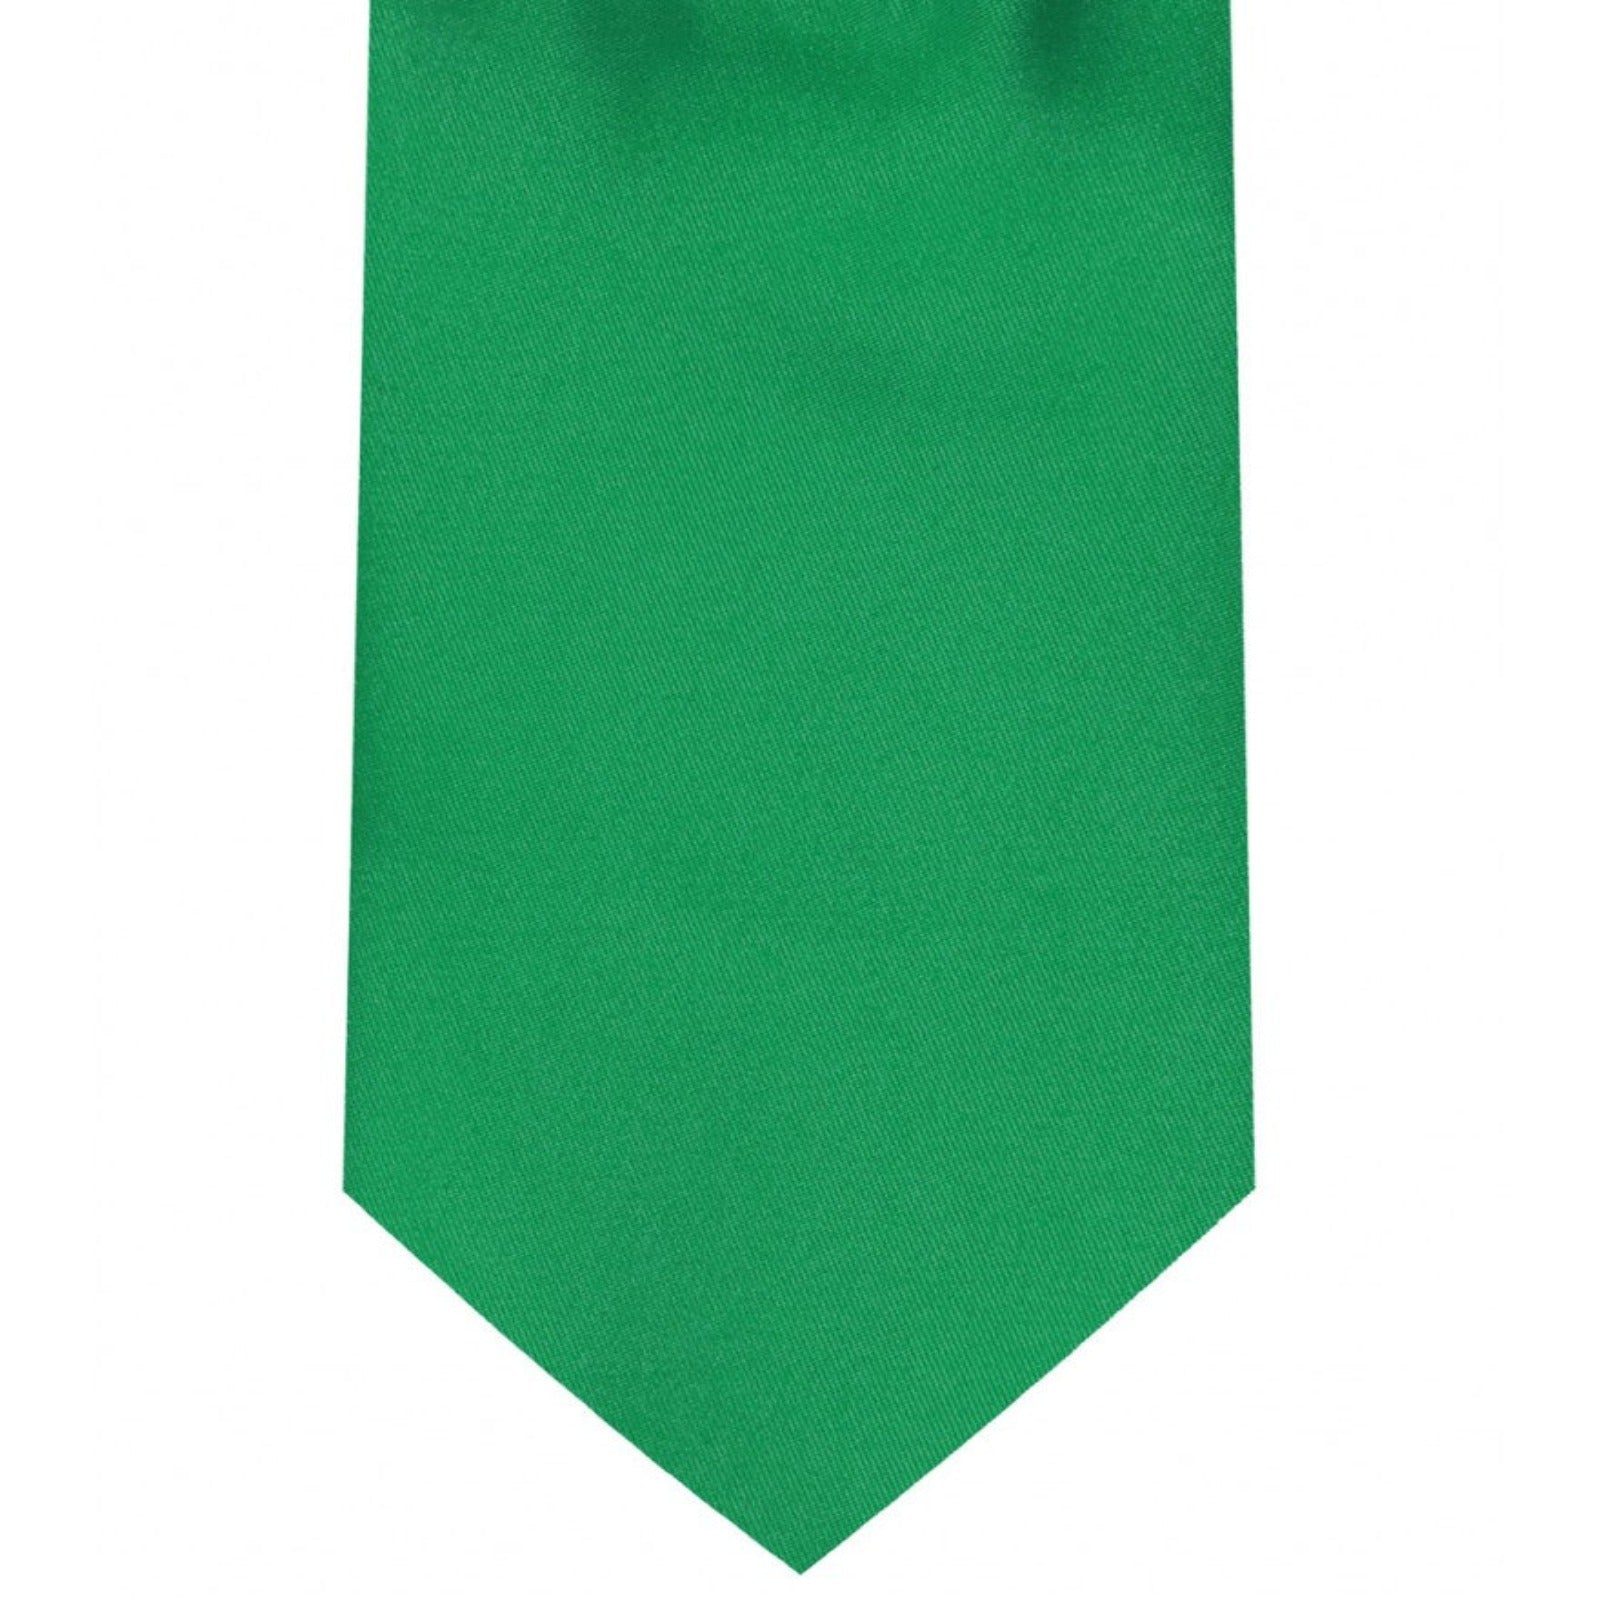 Classic Emerald Green Tie Regular width 3.5 inches With Matching Pocket Square | KCT Menswear 